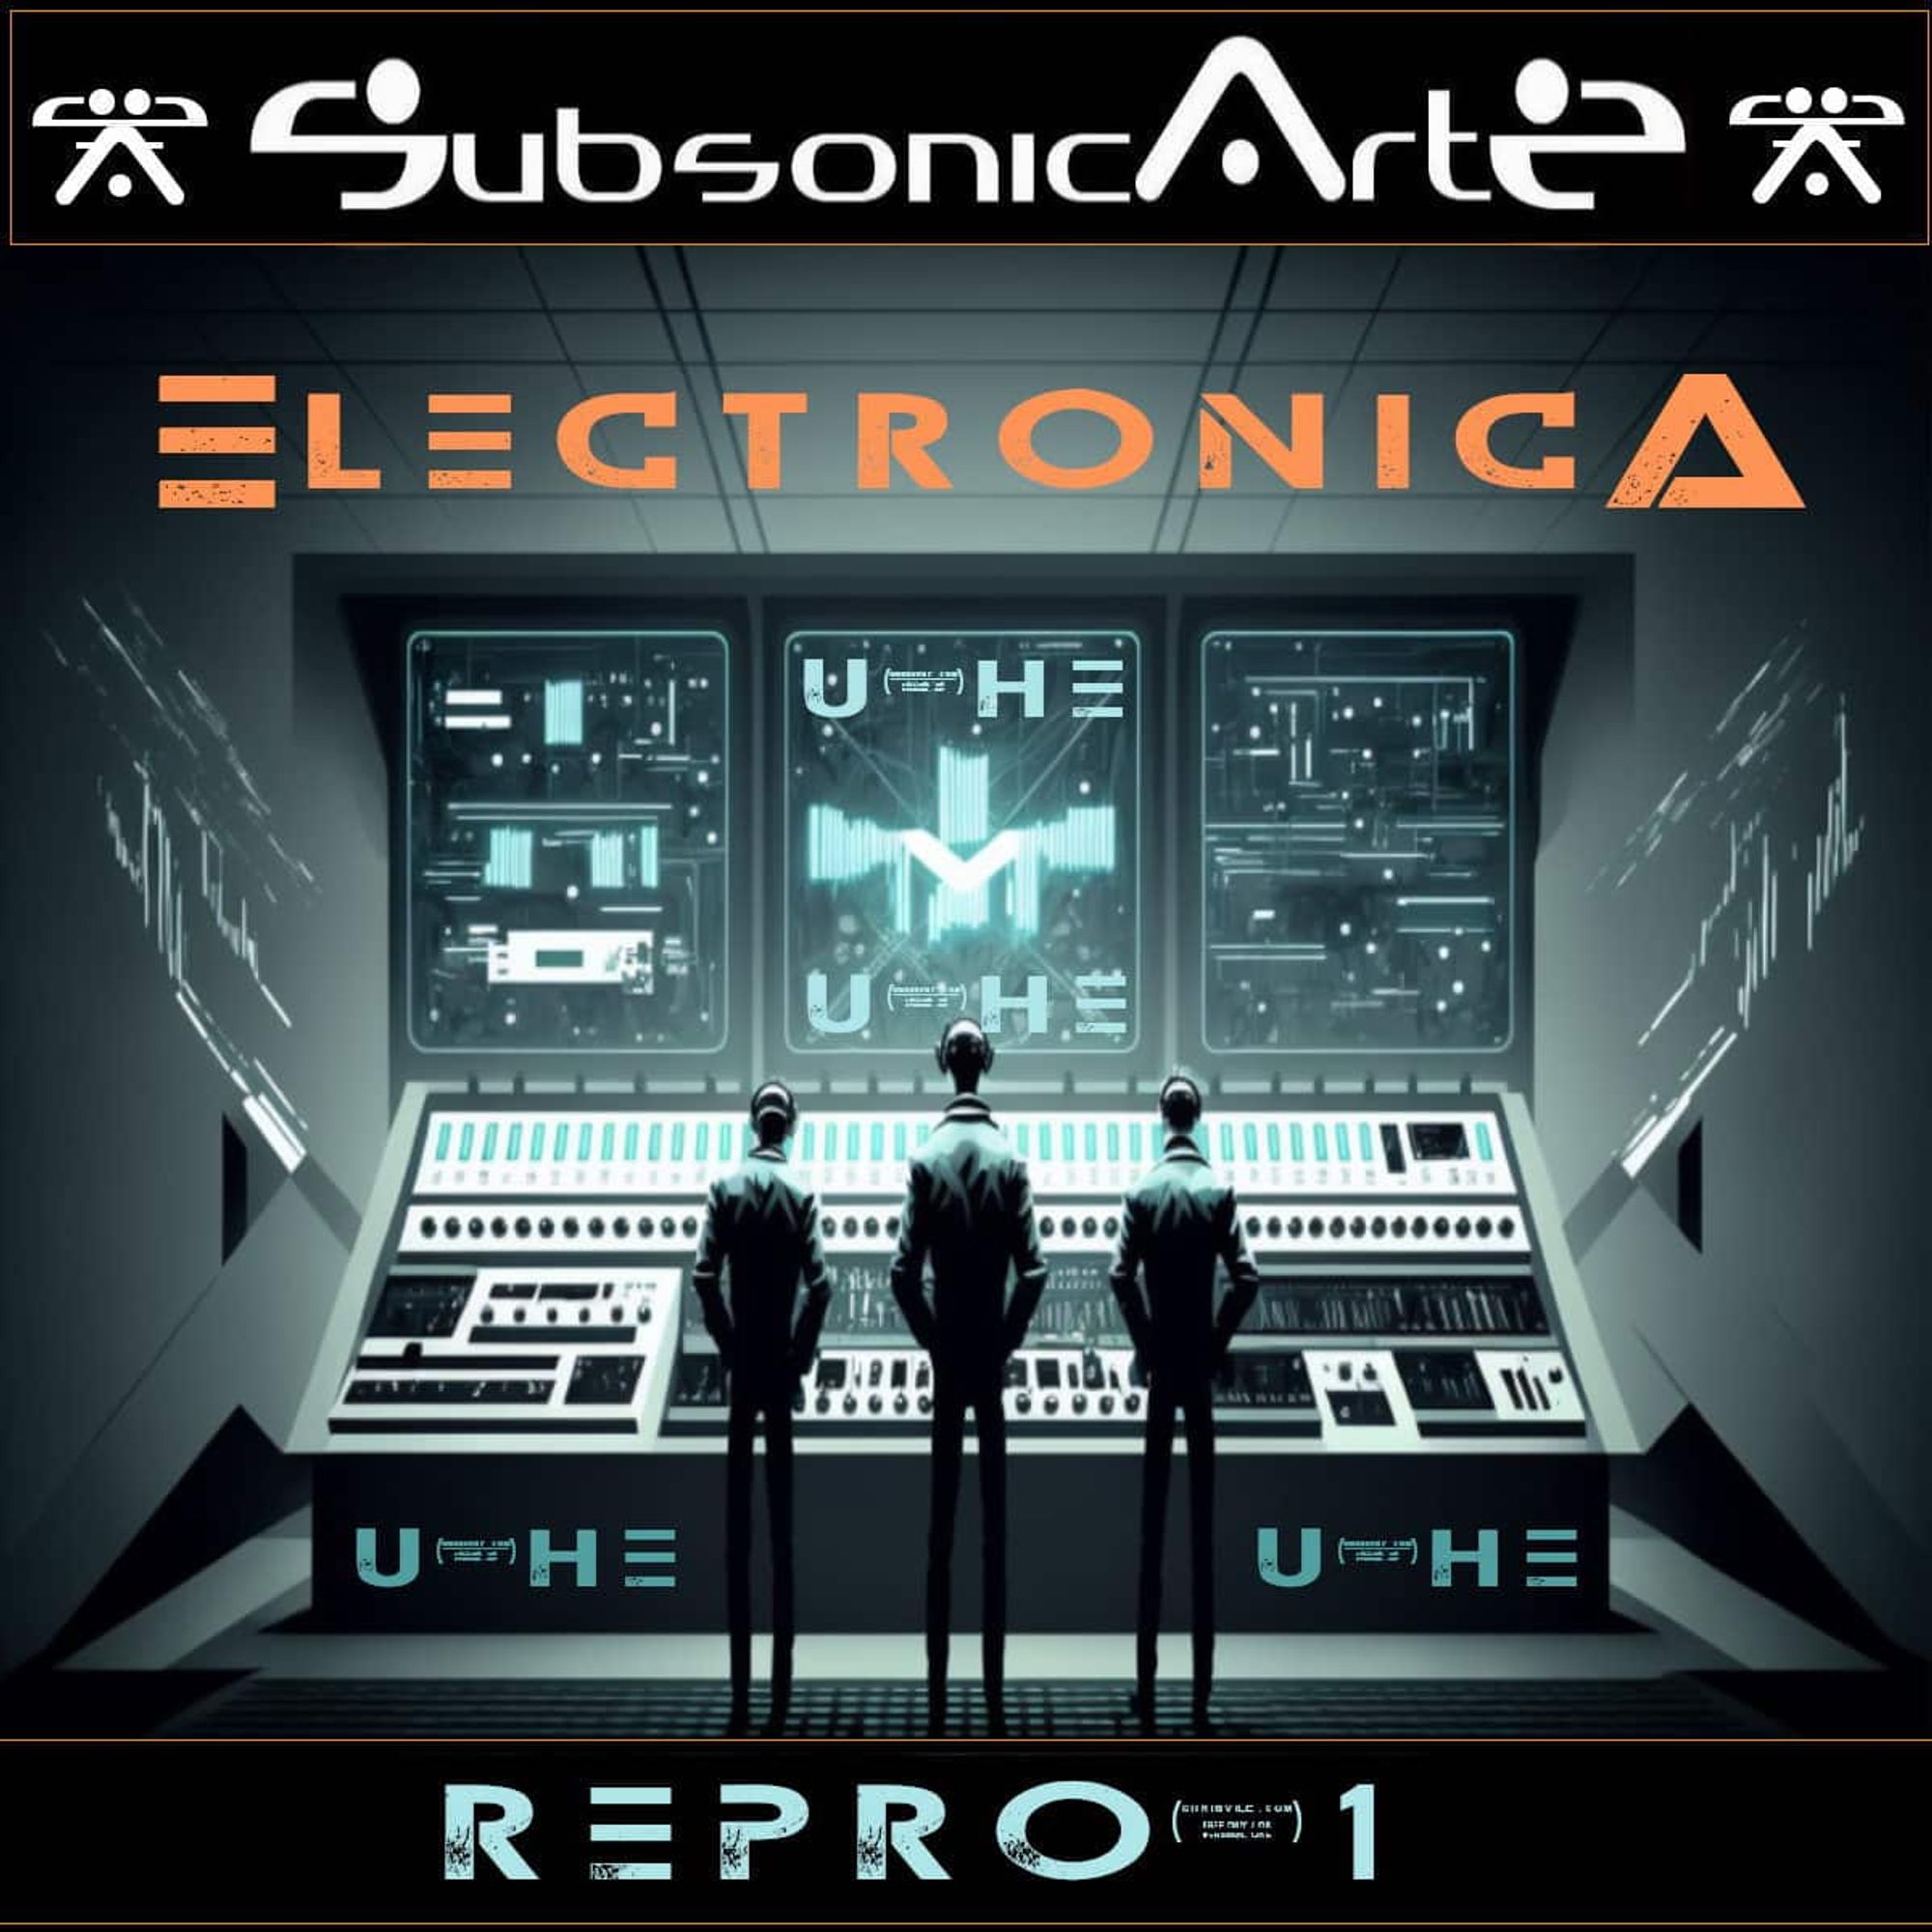 Subsonic Artz – Electronica for Repro 1 | Triple Spiral Audio